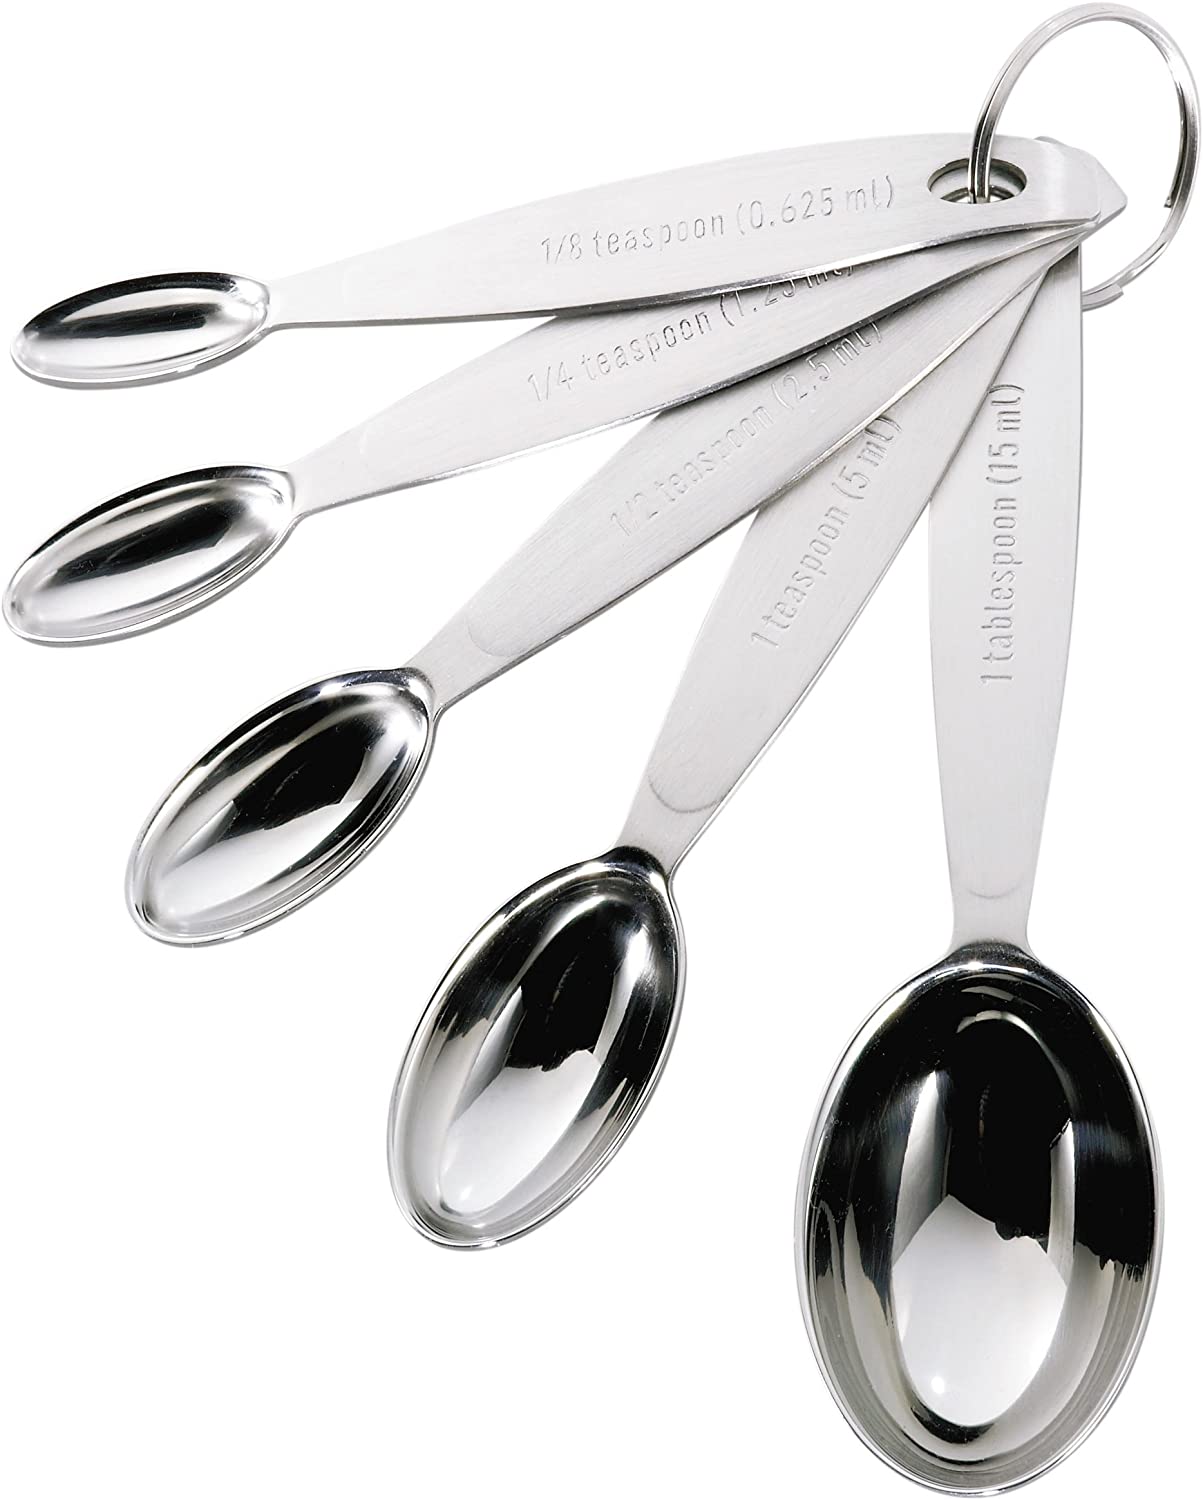 Reviews and Ratings for OXO Good Grips Stainless Steel Measuring Cups  (4Pc.) - KnifeCenter - OXO76381